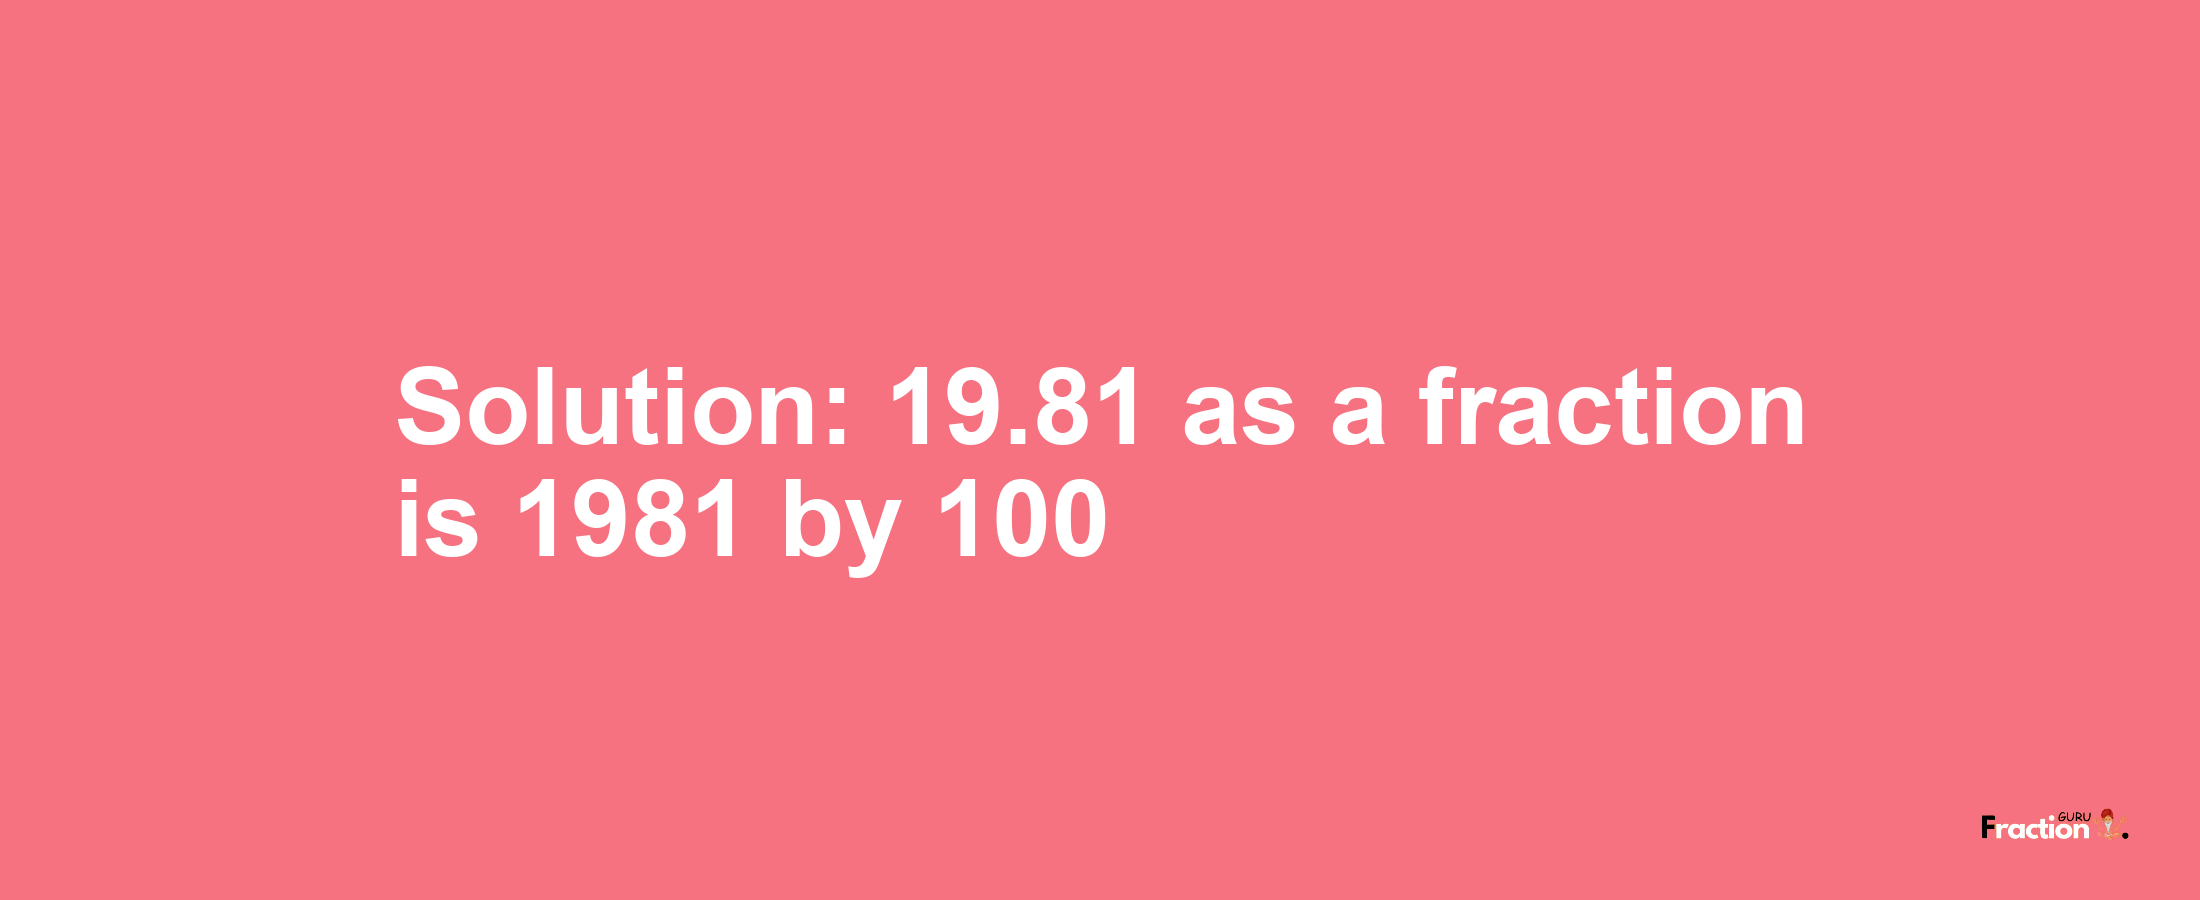 Solution:19.81 as a fraction is 1981/100